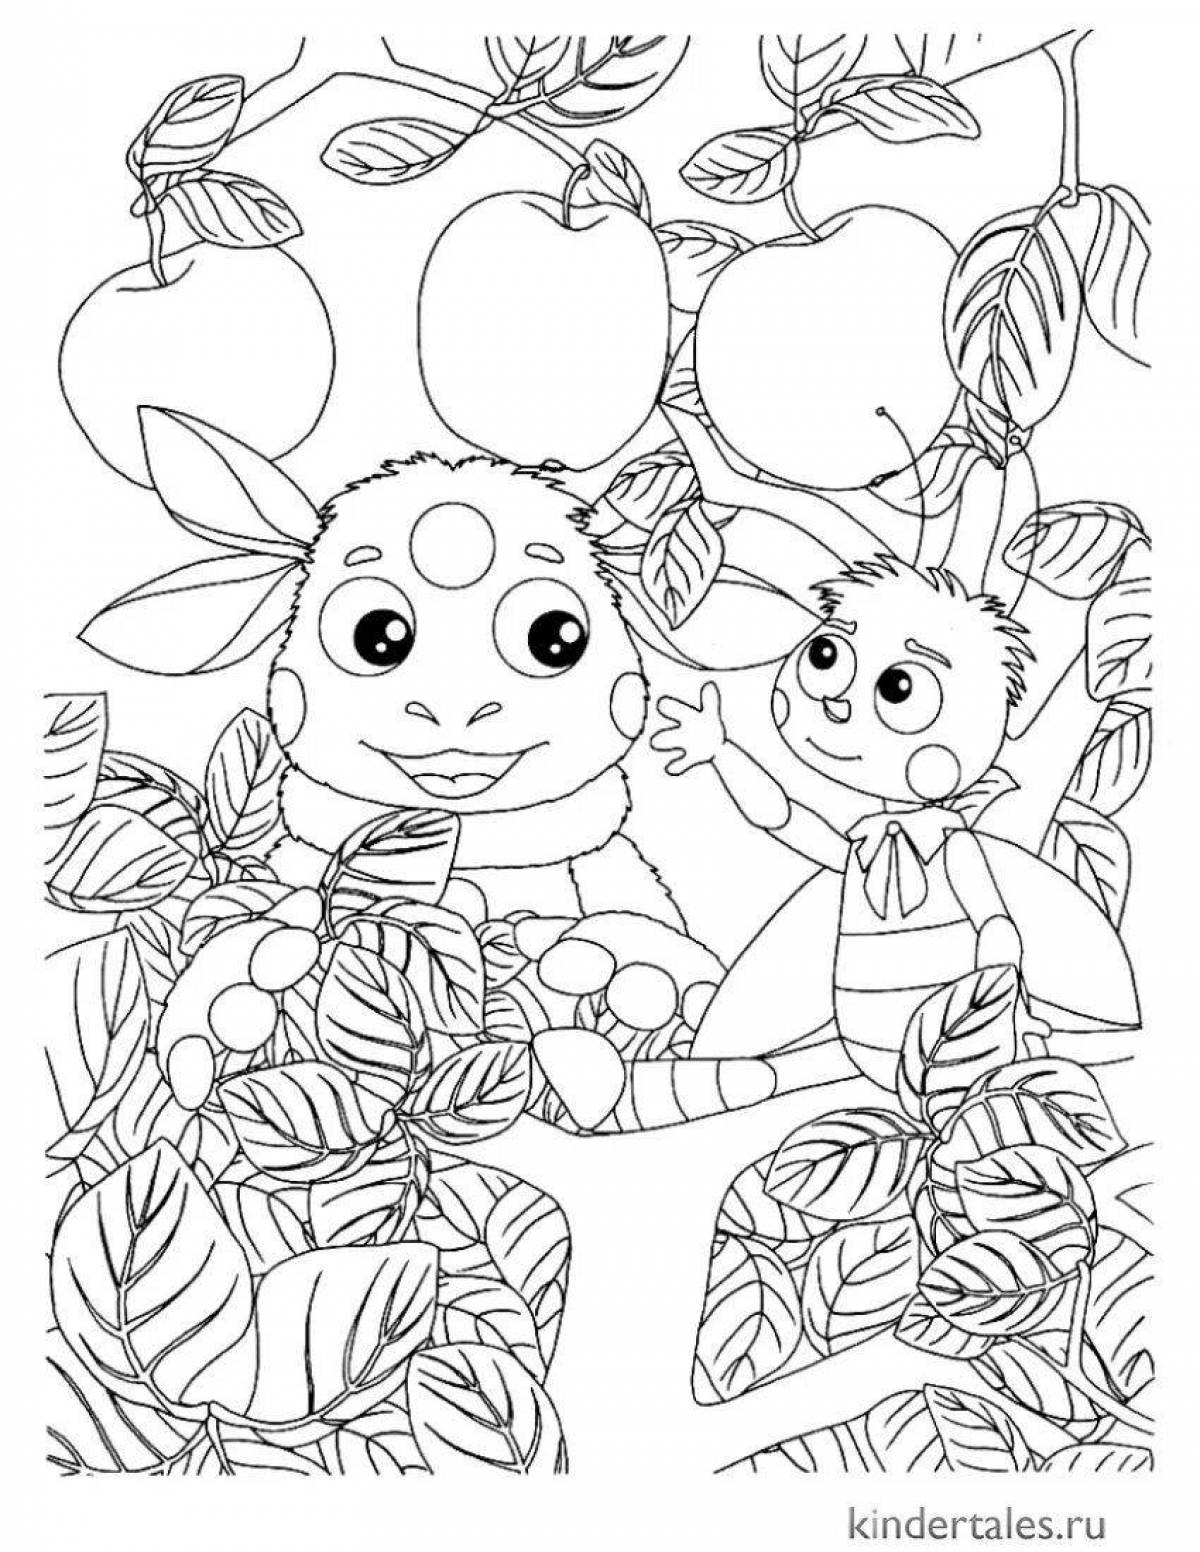 Coloring book charming Luntik and friends